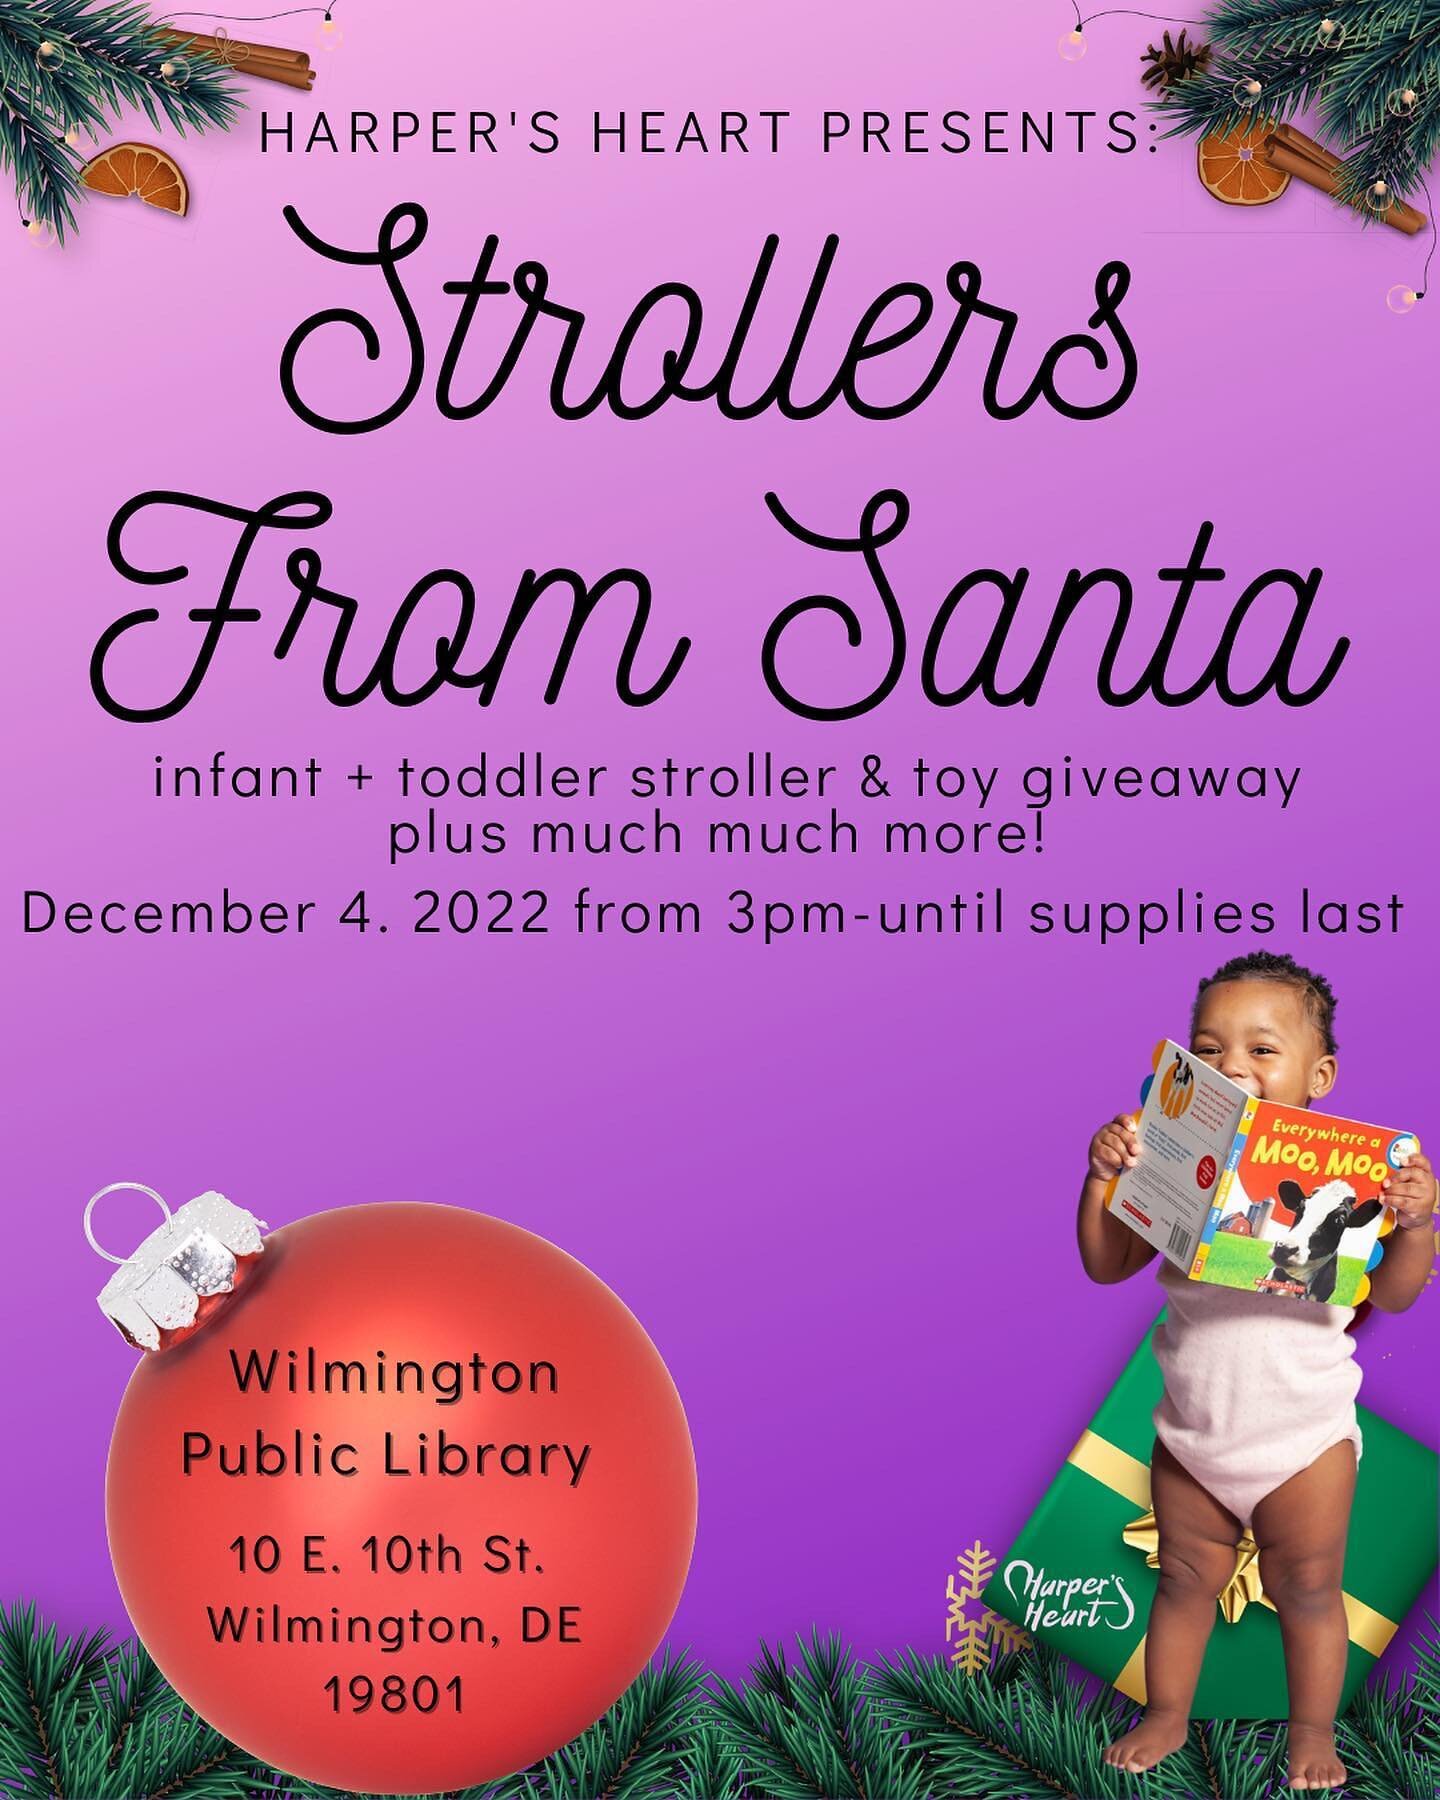 SHARE! SHARE! SHARE! 

Tis&rsquo; the season for a holiday giveaway 🎄Harper&rsquo;s Heart is BACK with the Strollers From Santa event. 

This December 4th at the Wilmington Public Library, 10 E. 10th St. Wilmington DE 19801 from 3pm until supplies l